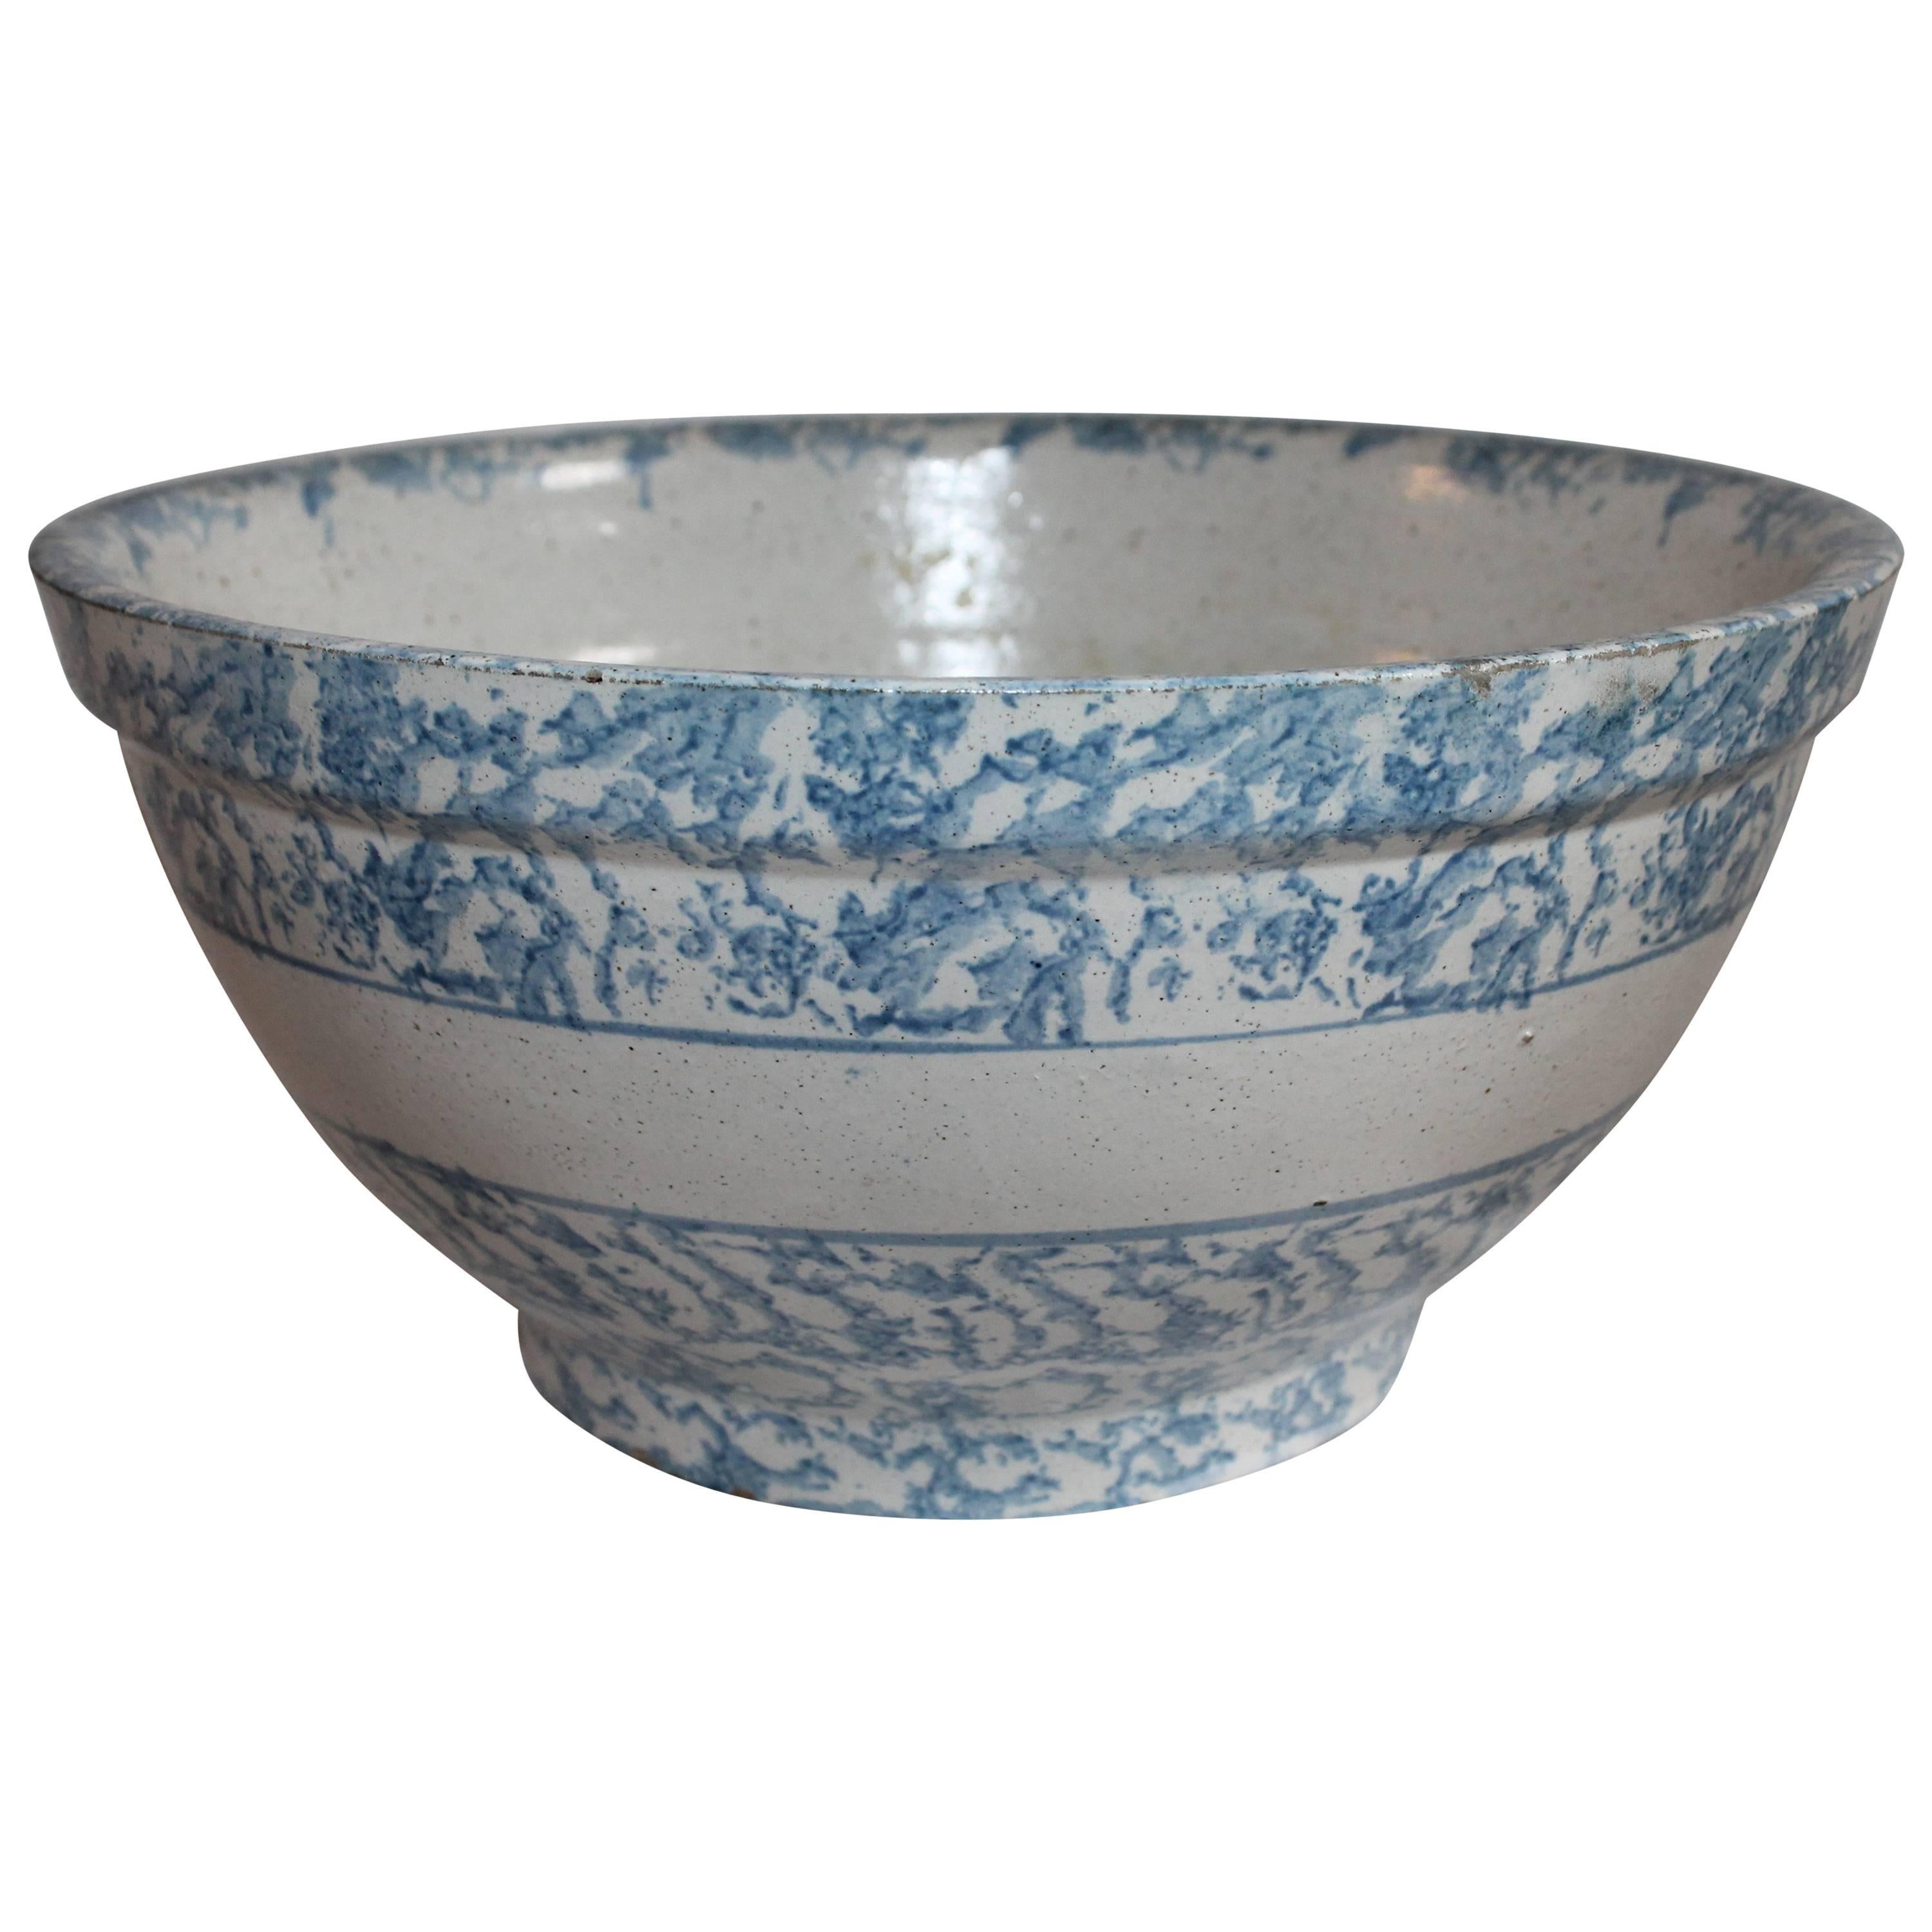 19th C Sponge Ware Giant Mixing Bowl For Sale